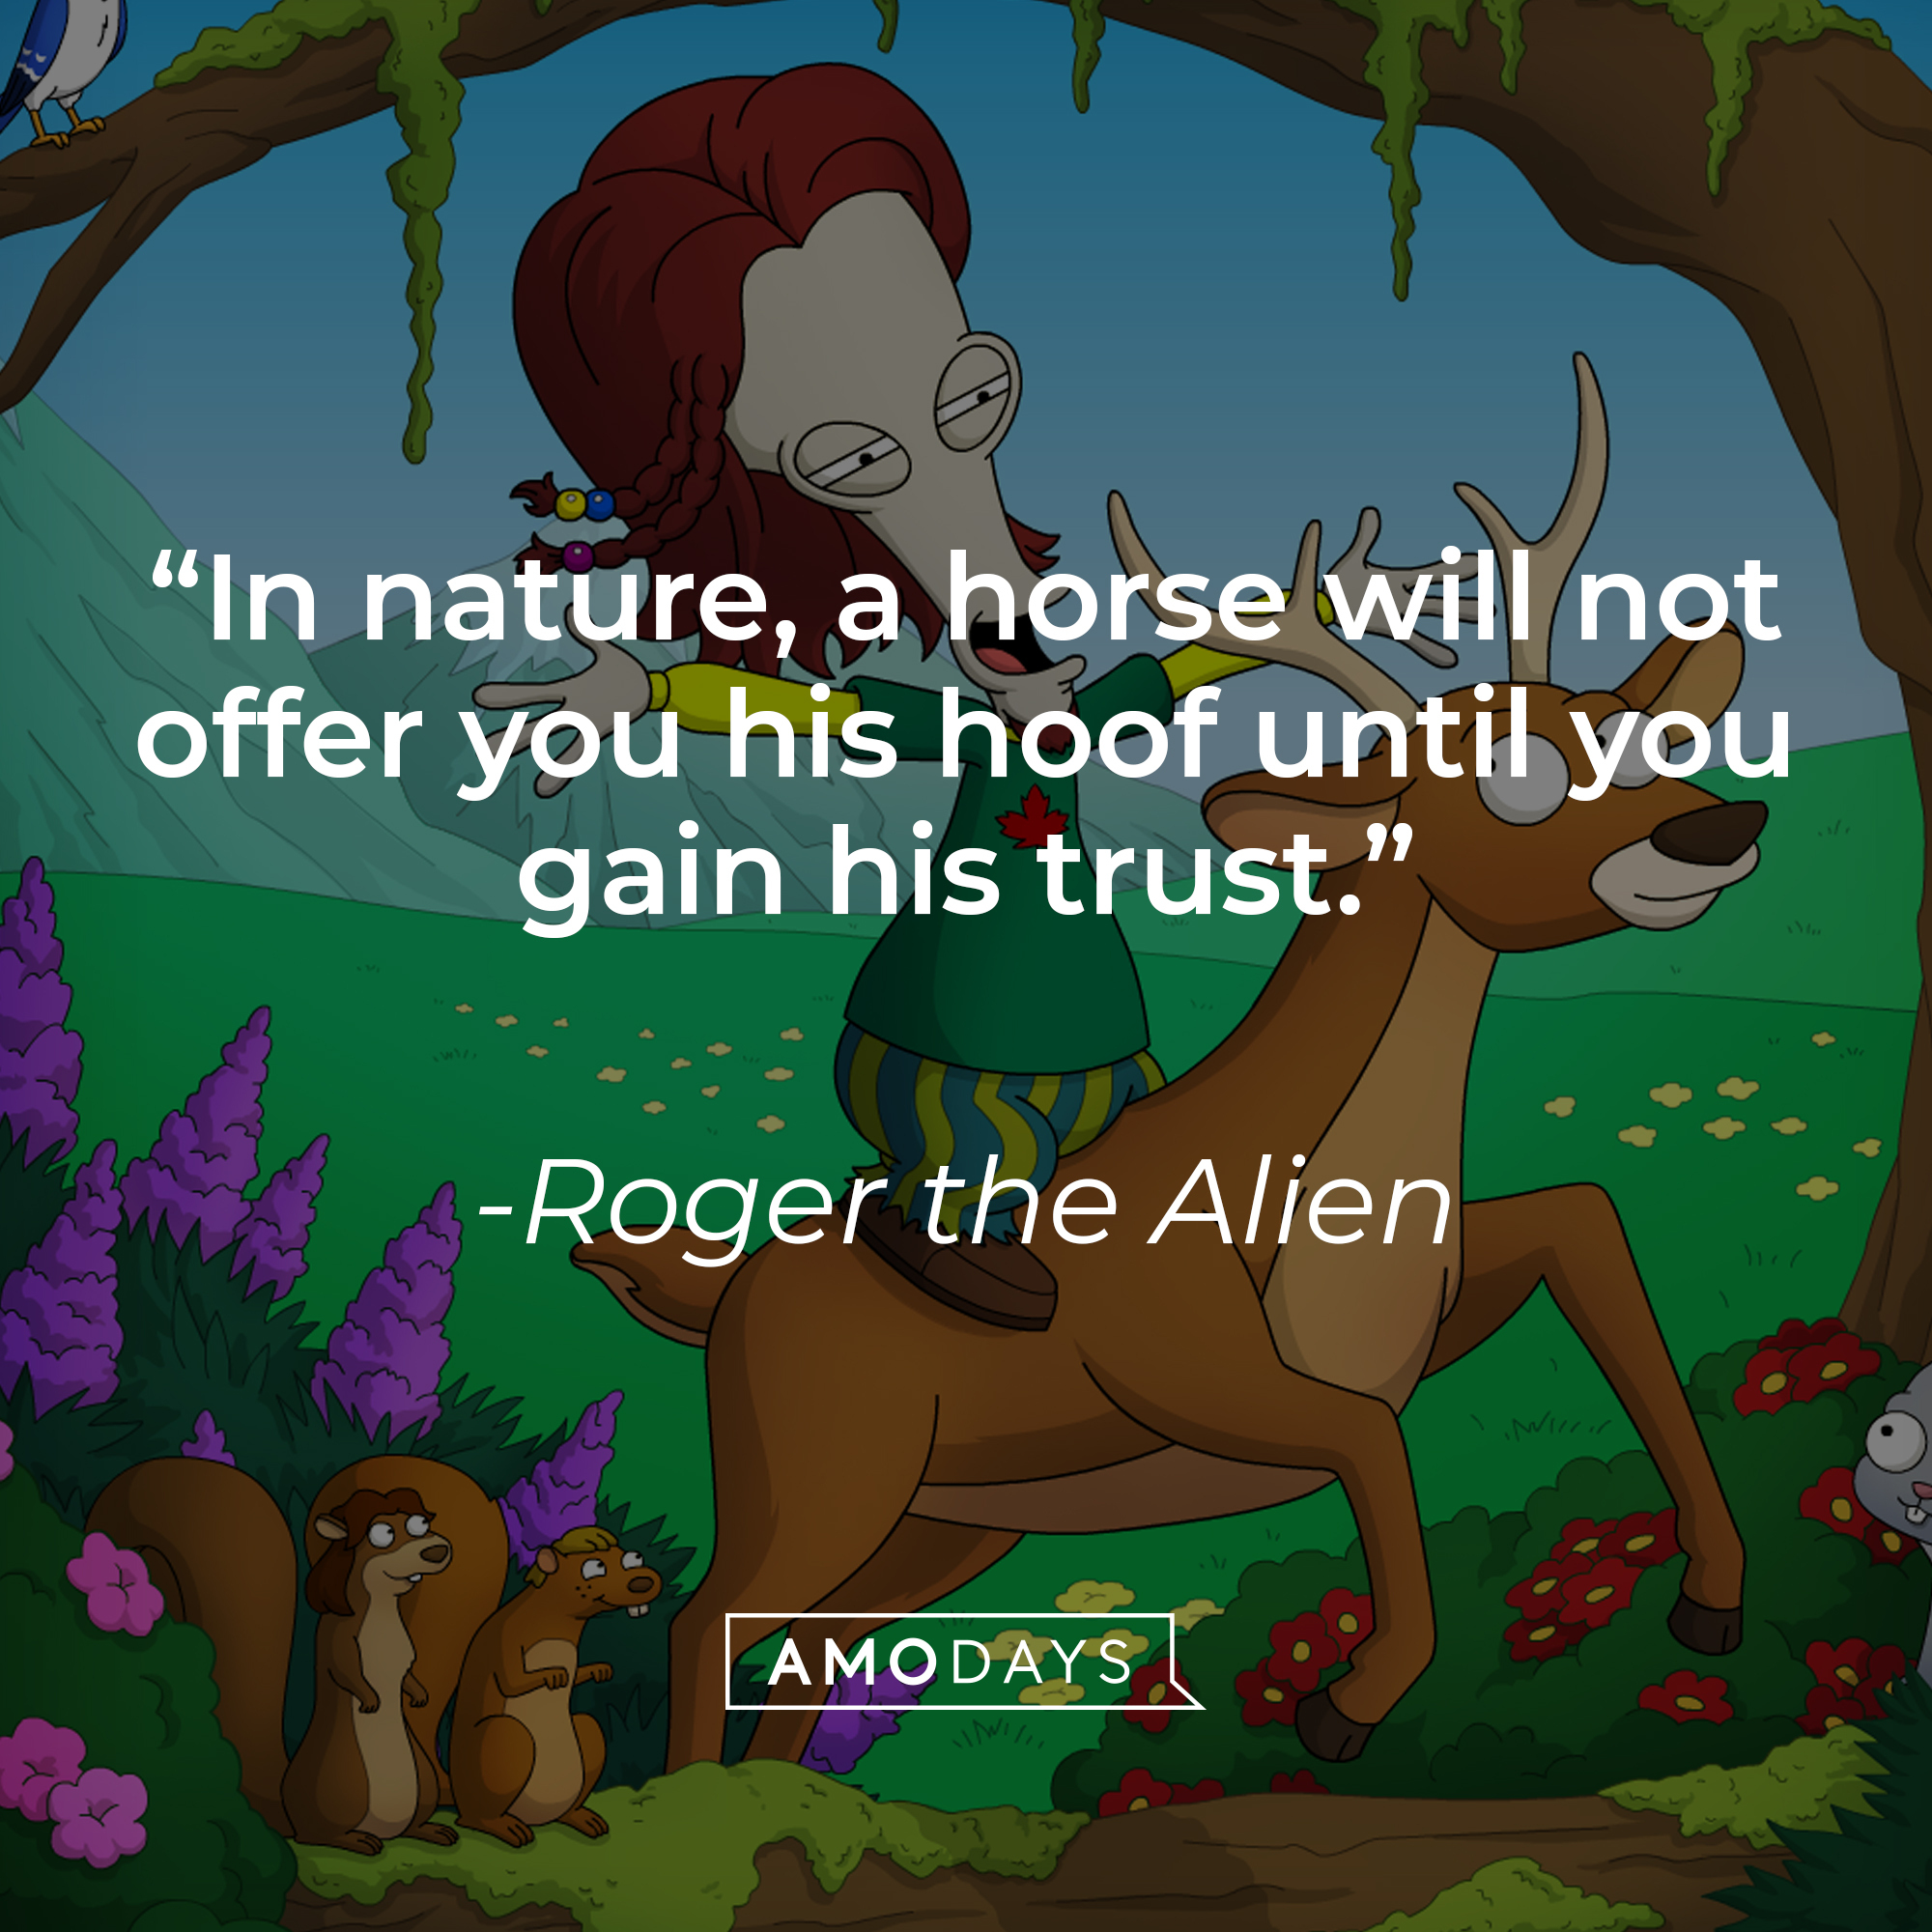 Roger the Alien with his quote: “In nature, a horse will not offer you his hoof until you gain his trust.” | Source: facebook.com/AmericanDad